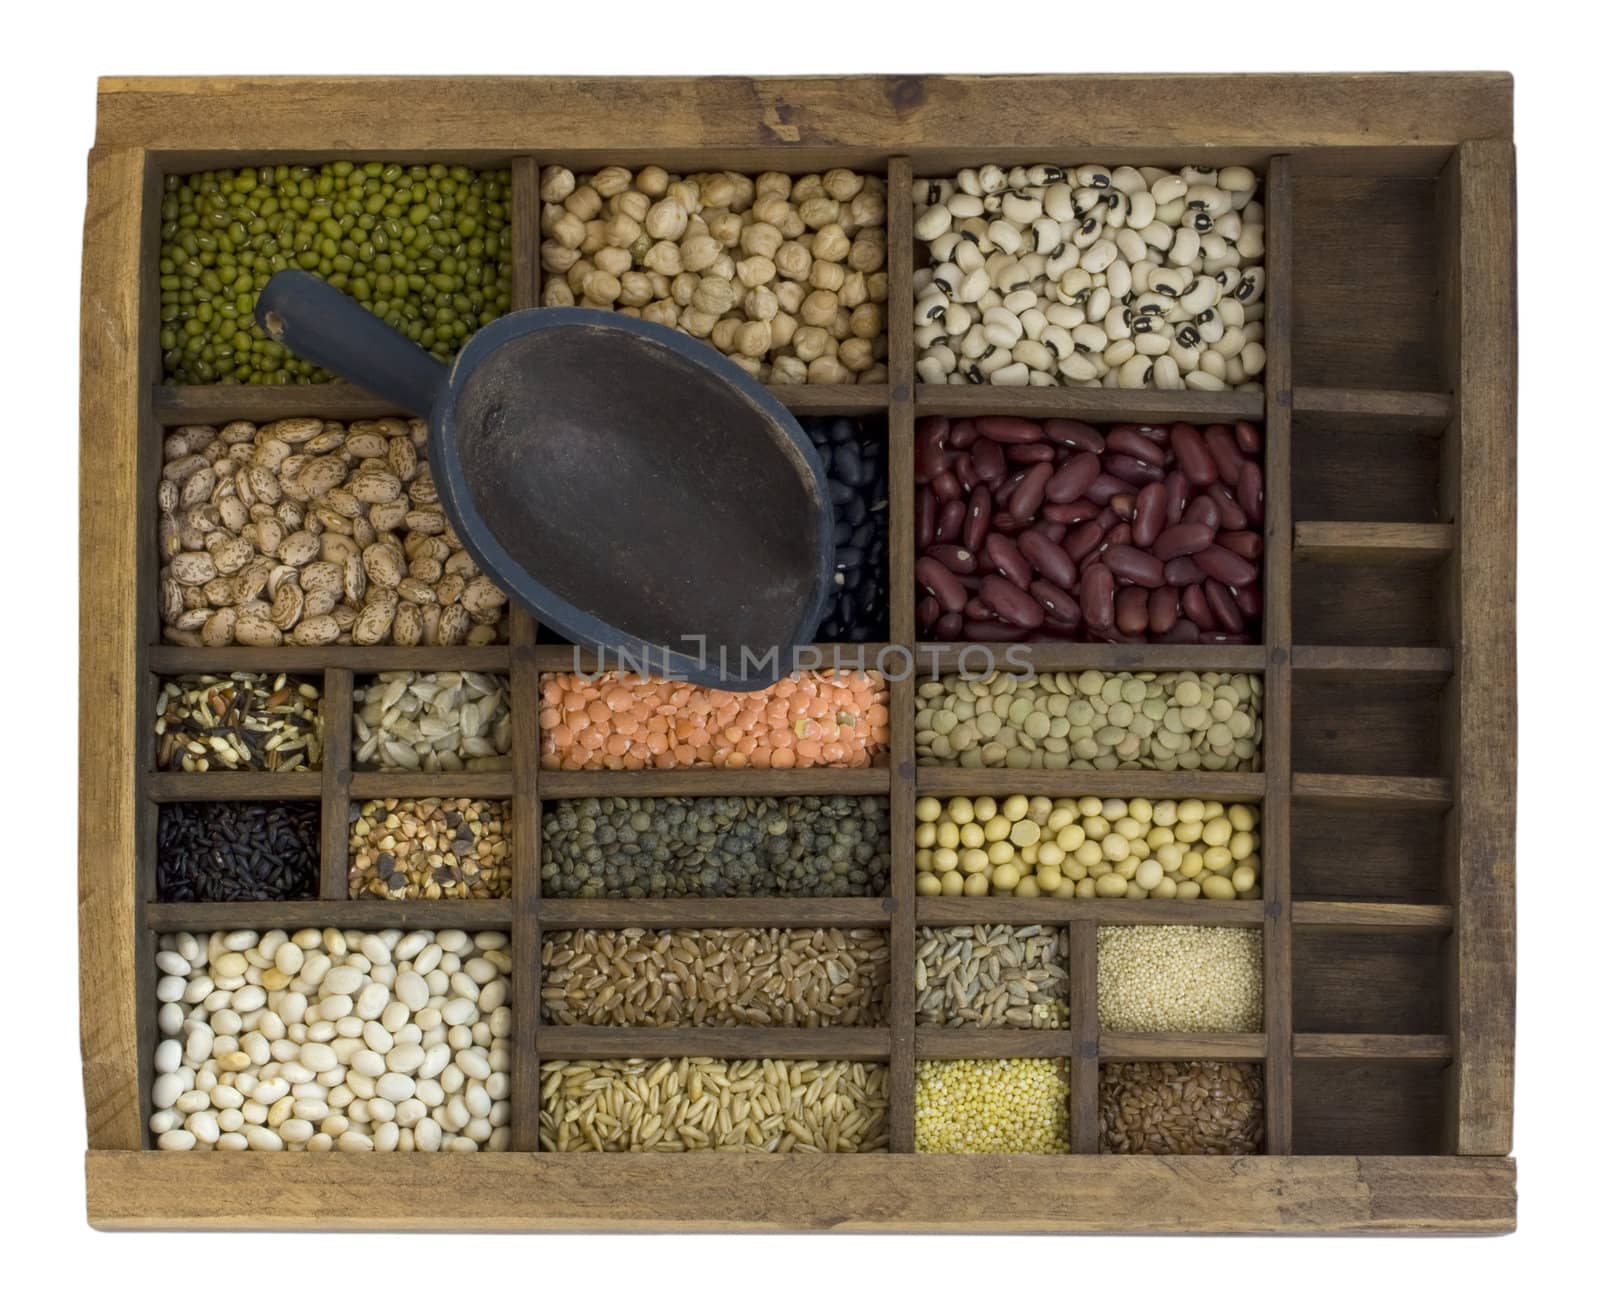 typesetter case with scoop and assorted beans, grains and seeds by PixelsAway